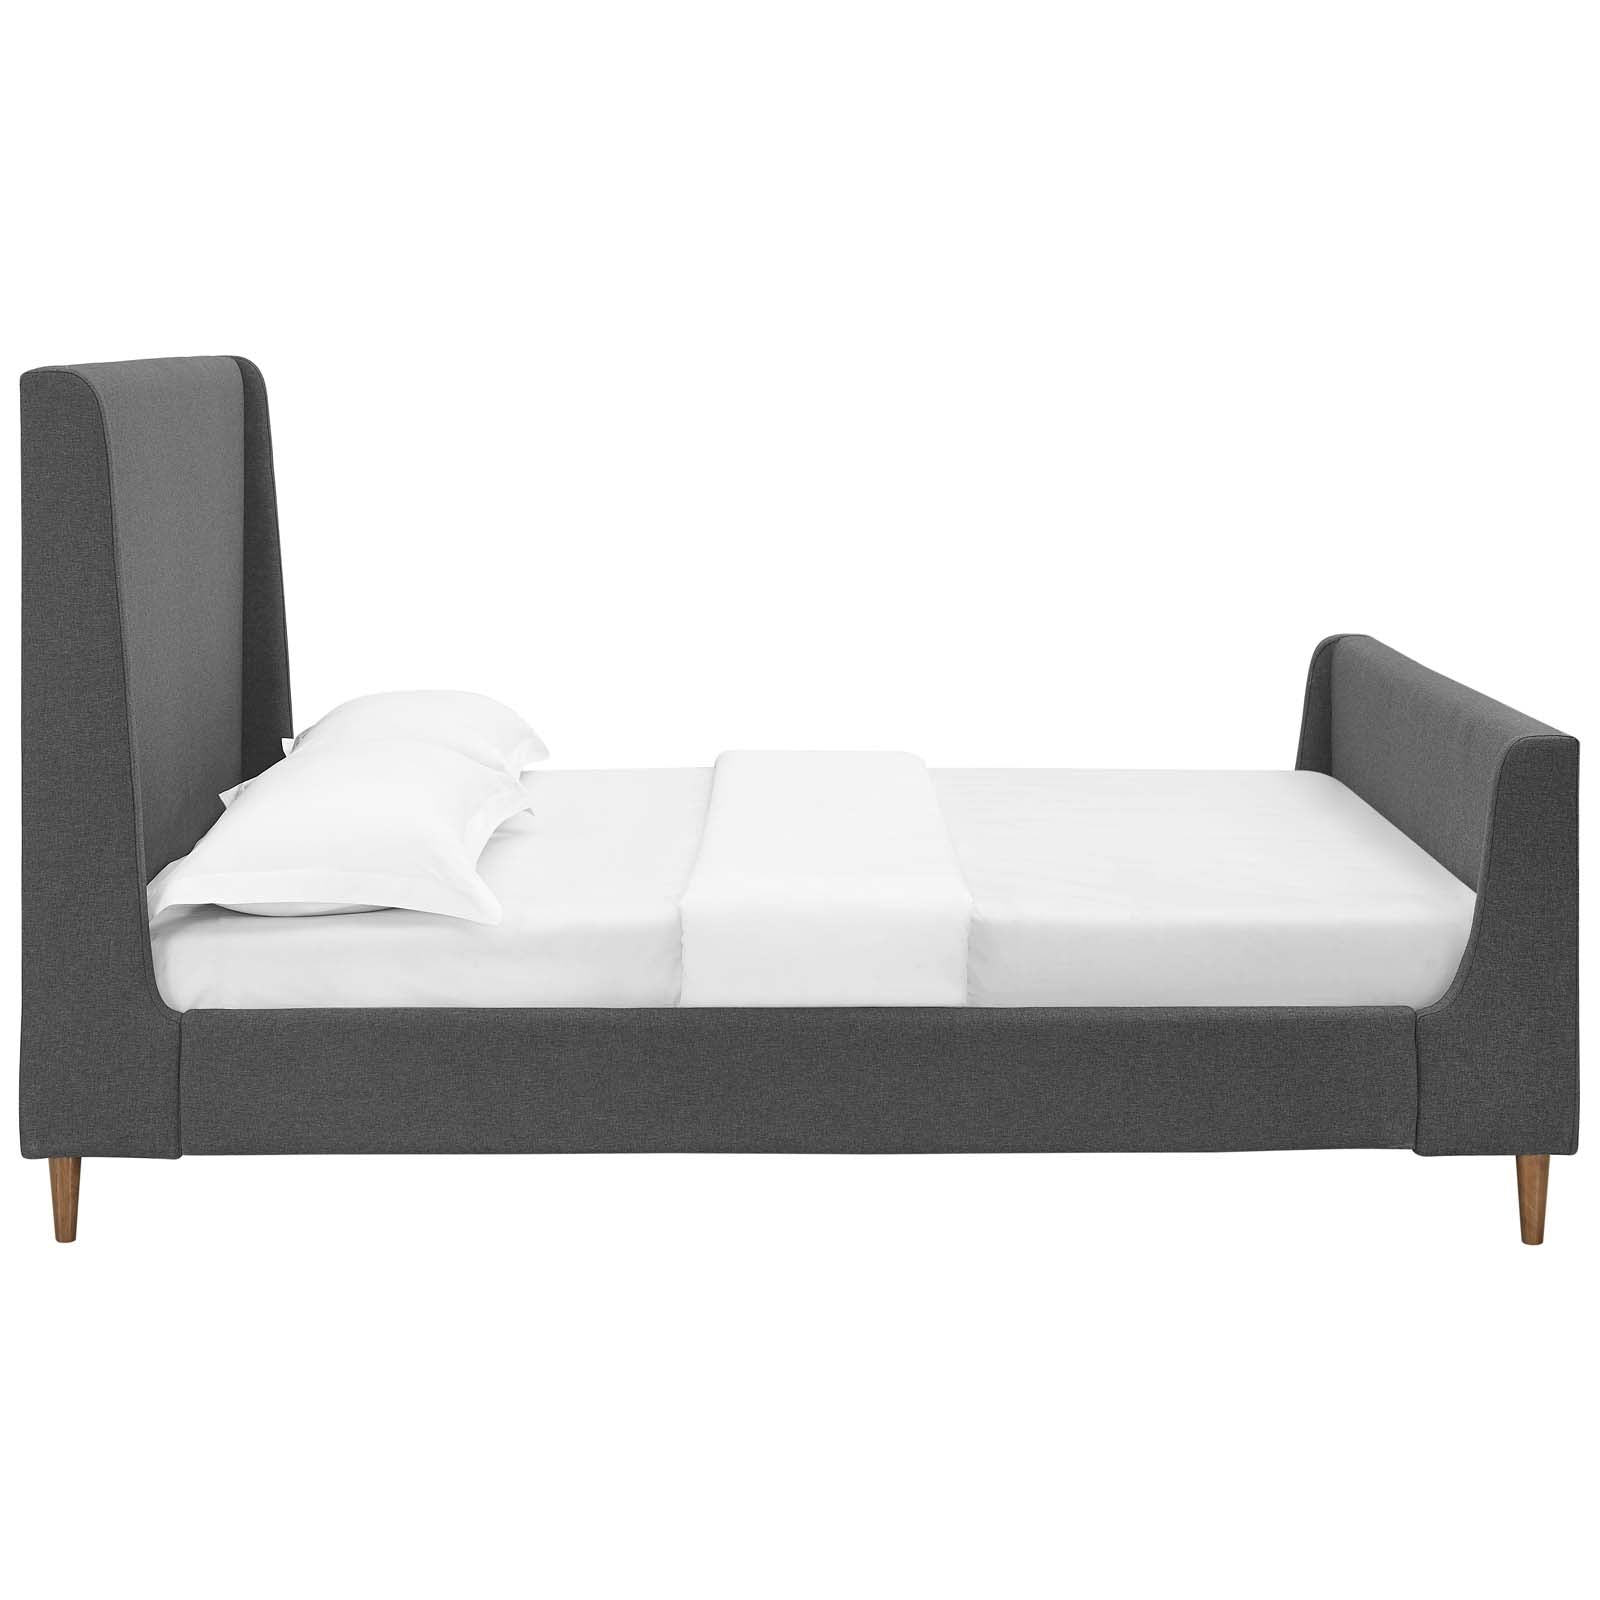 Aubree Queen Upholstered Fabric Sleigh Platform Bed - East Shore Modern Home Furnishings